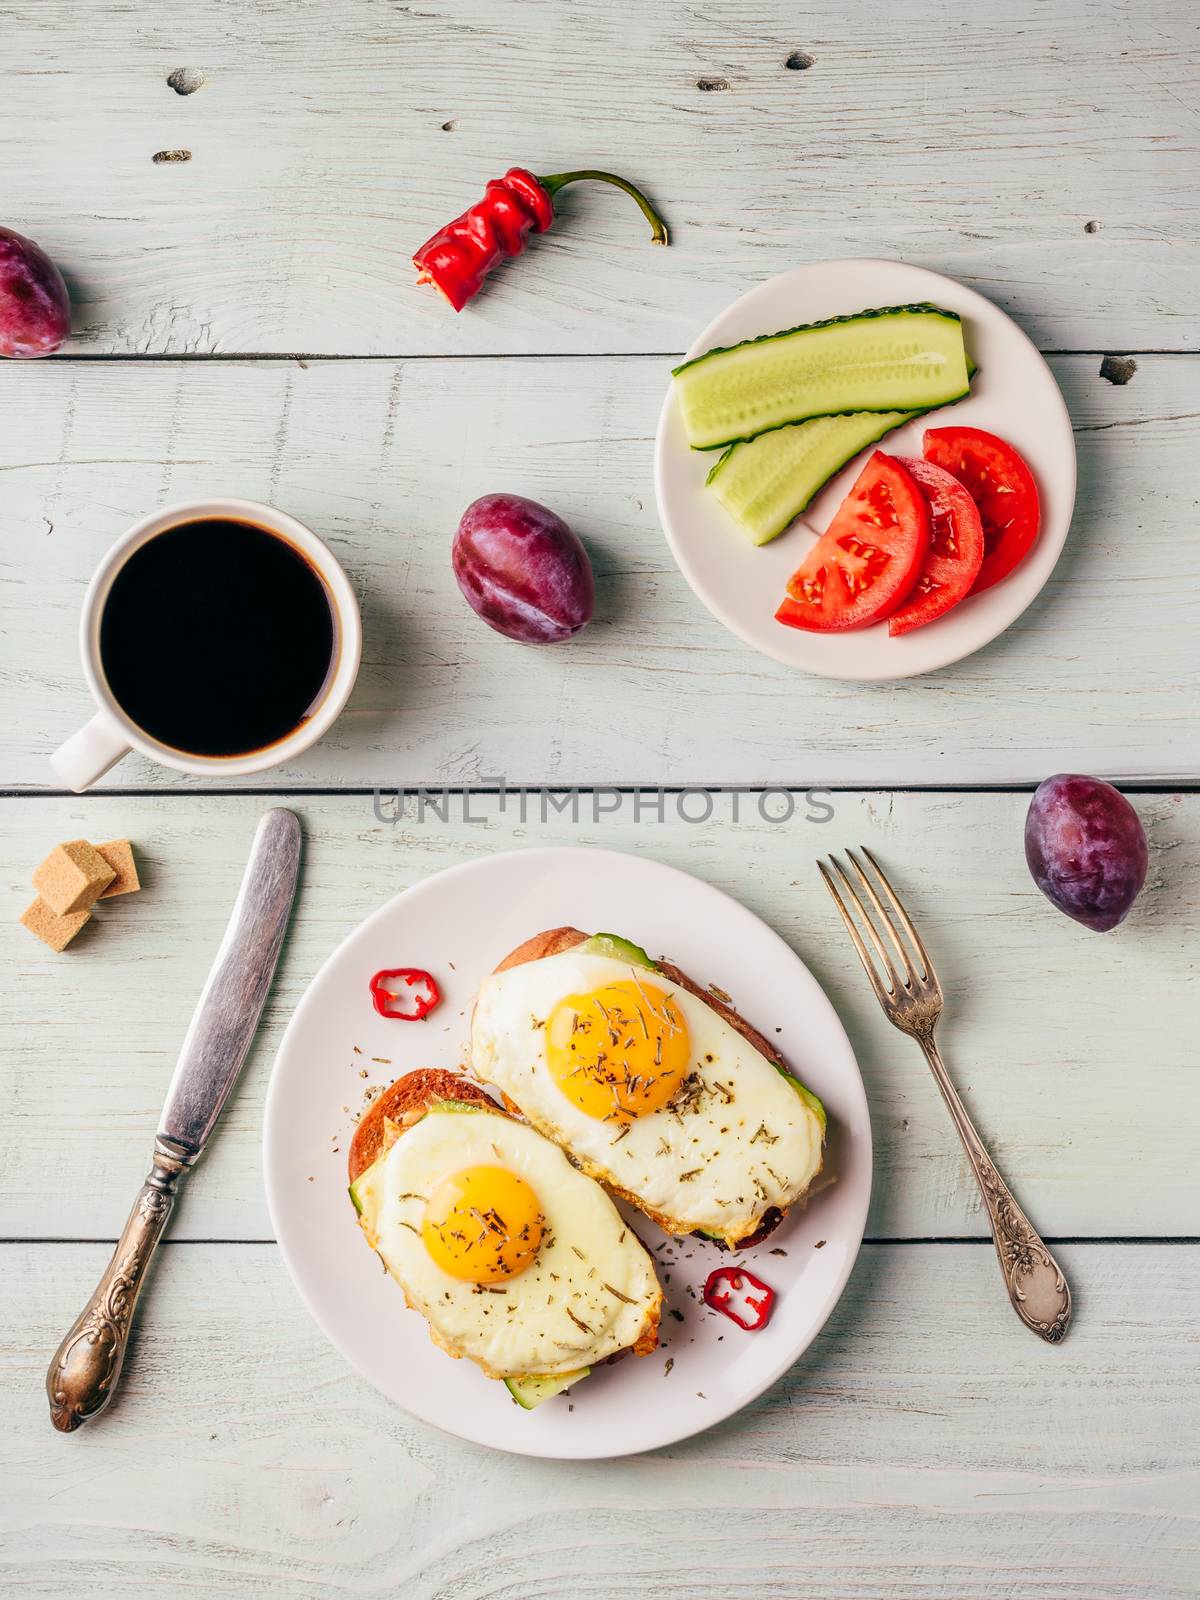 Breakfast toasts with vegetables and fried egg on white plate, cup of coffee and some fruits over wooden background. Dieting food concept. View from above.